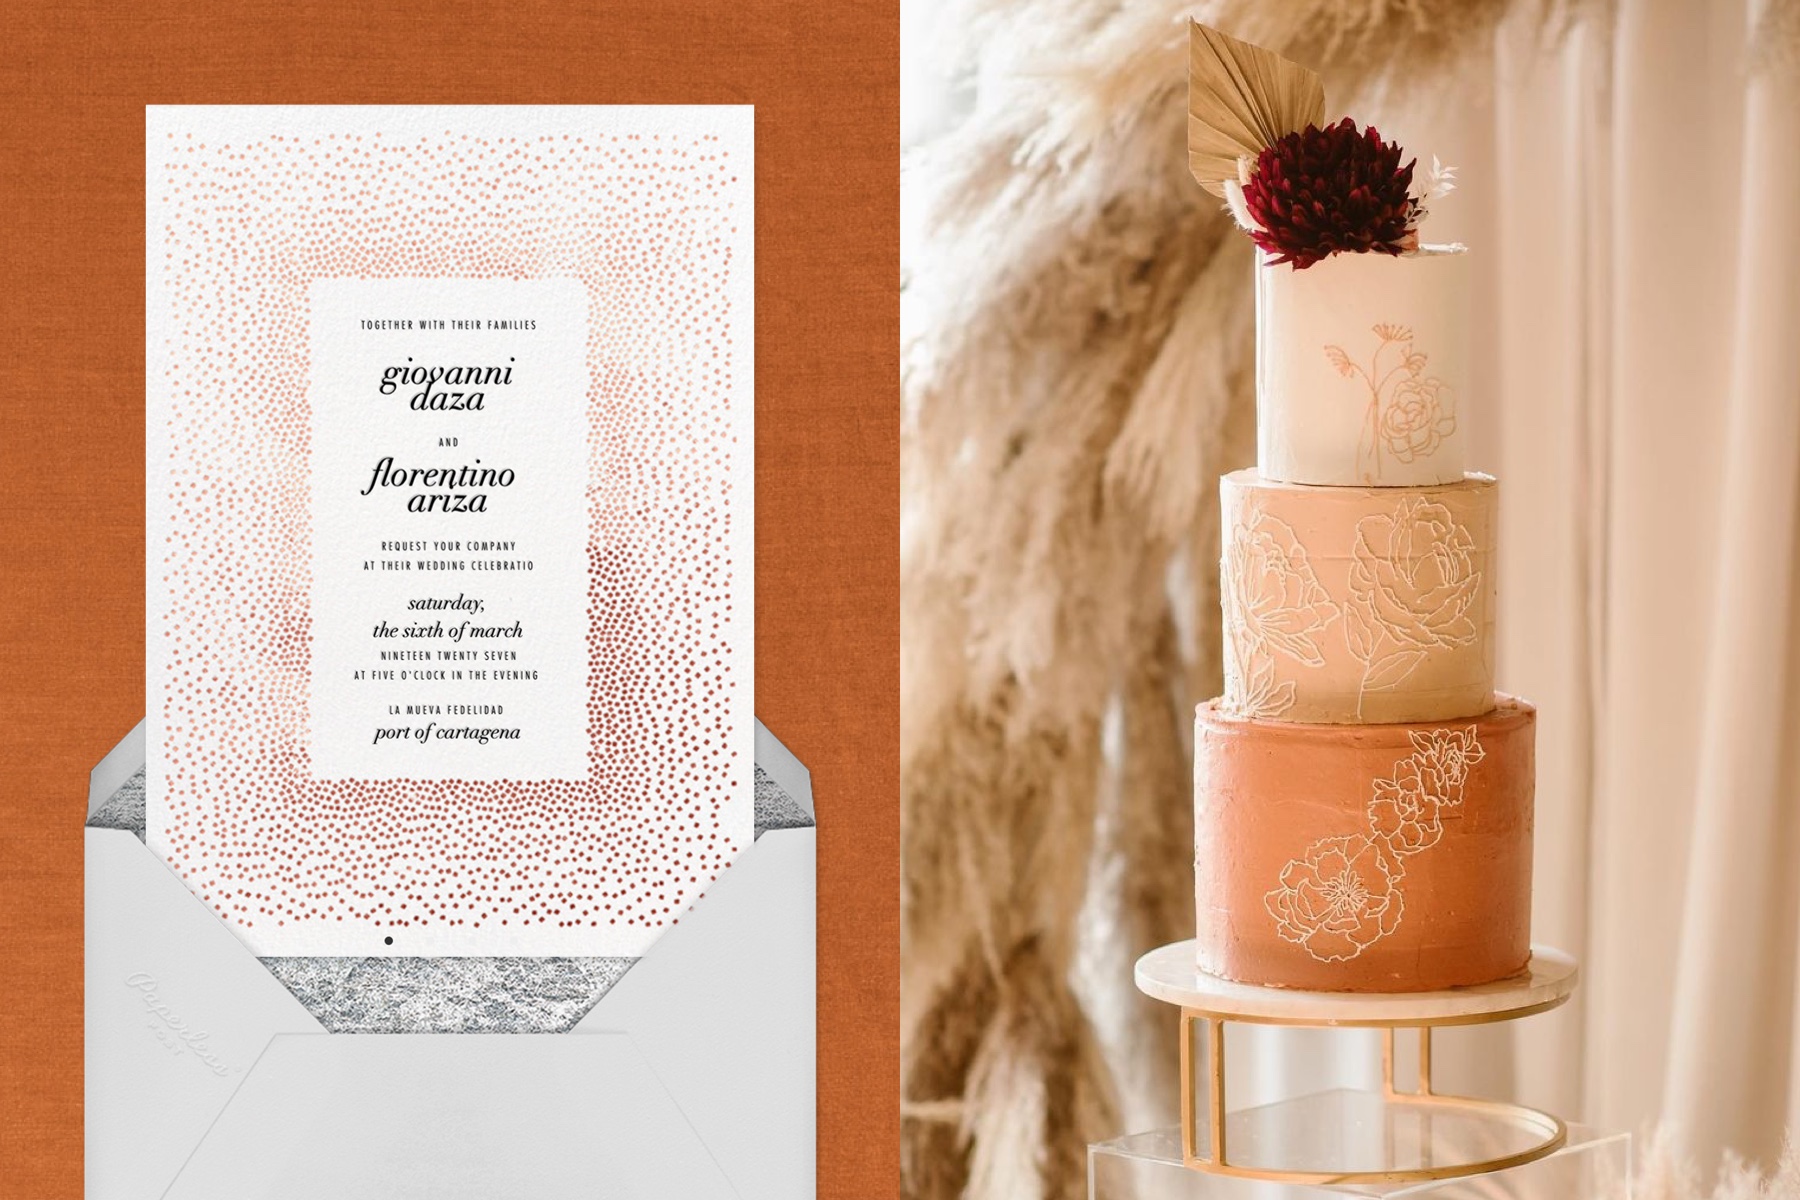 Left: “Jubilee II - Rose Gold” by Kelly Wearstler for Paperless Post | Right: Cake design by Cāk the Bakery, image courtesy of Cāk the Bakery and Liz Weitz